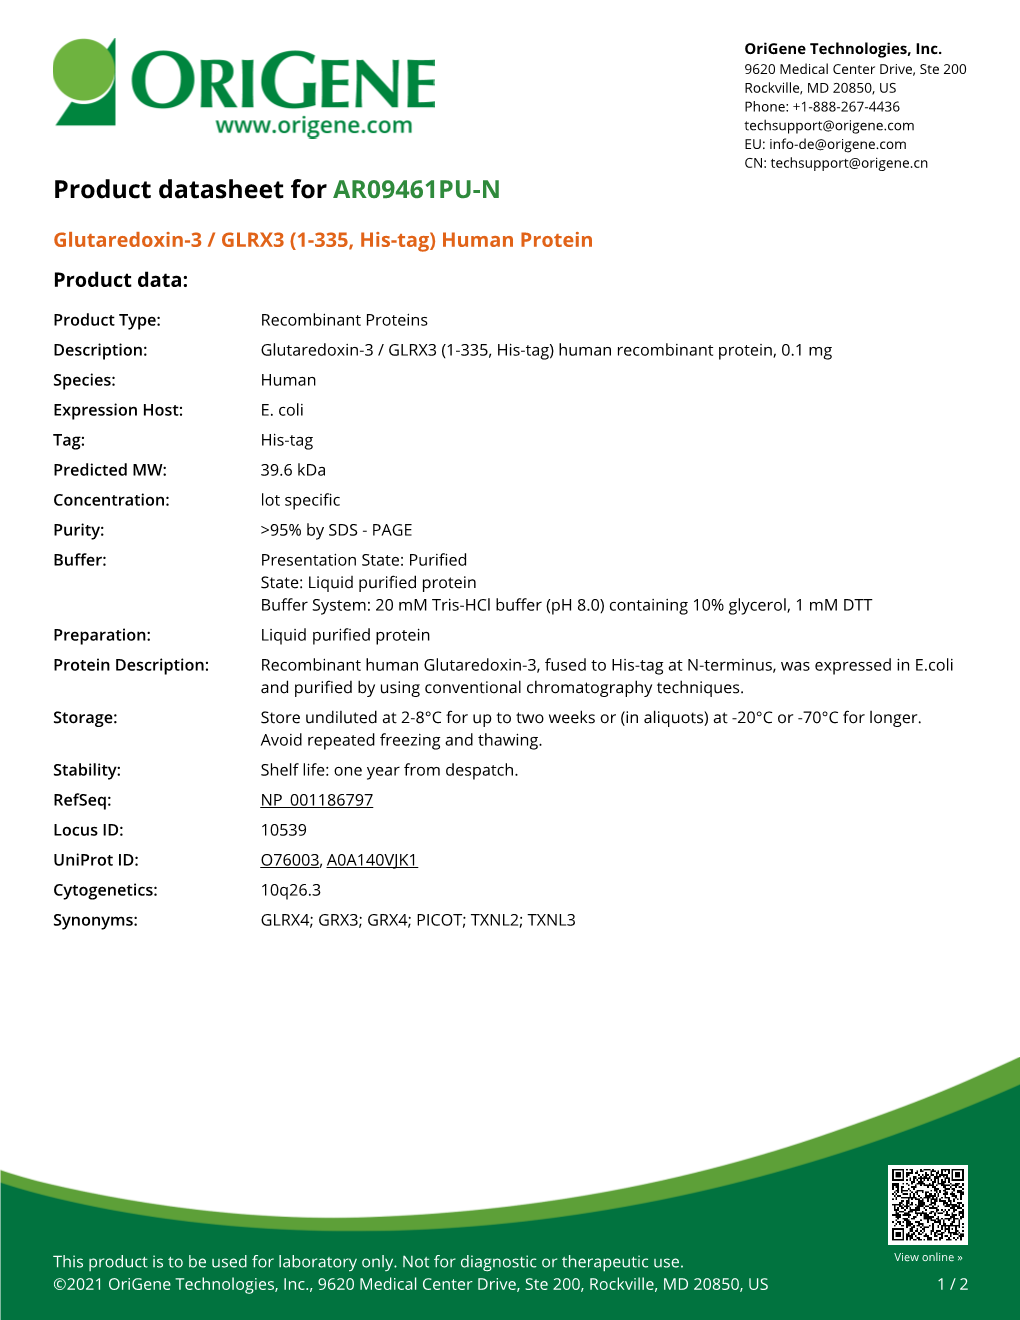 Glutaredoxin-3 / GLRX3 (1-335, His-Tag) Human Protein Product Data